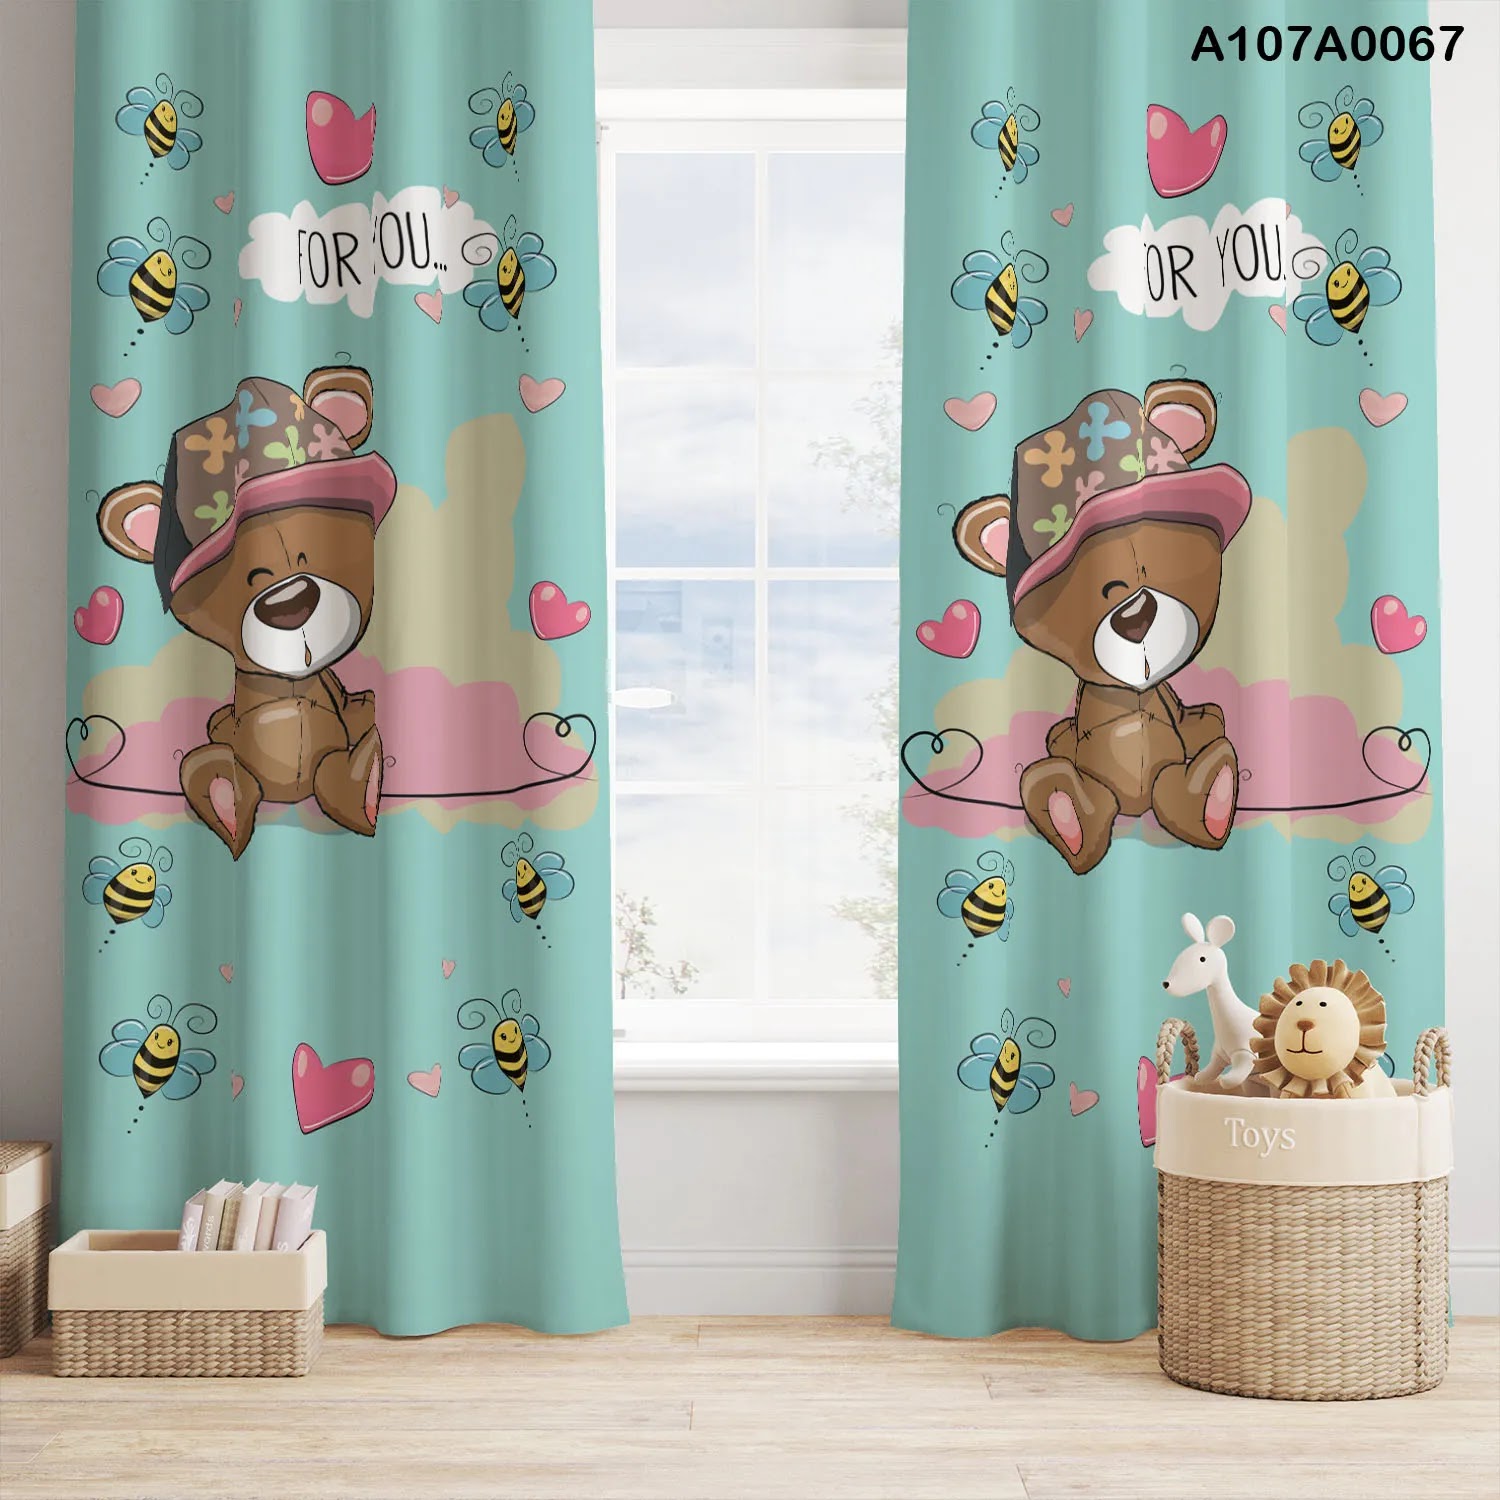 Curtains in green with bear and bees for children room